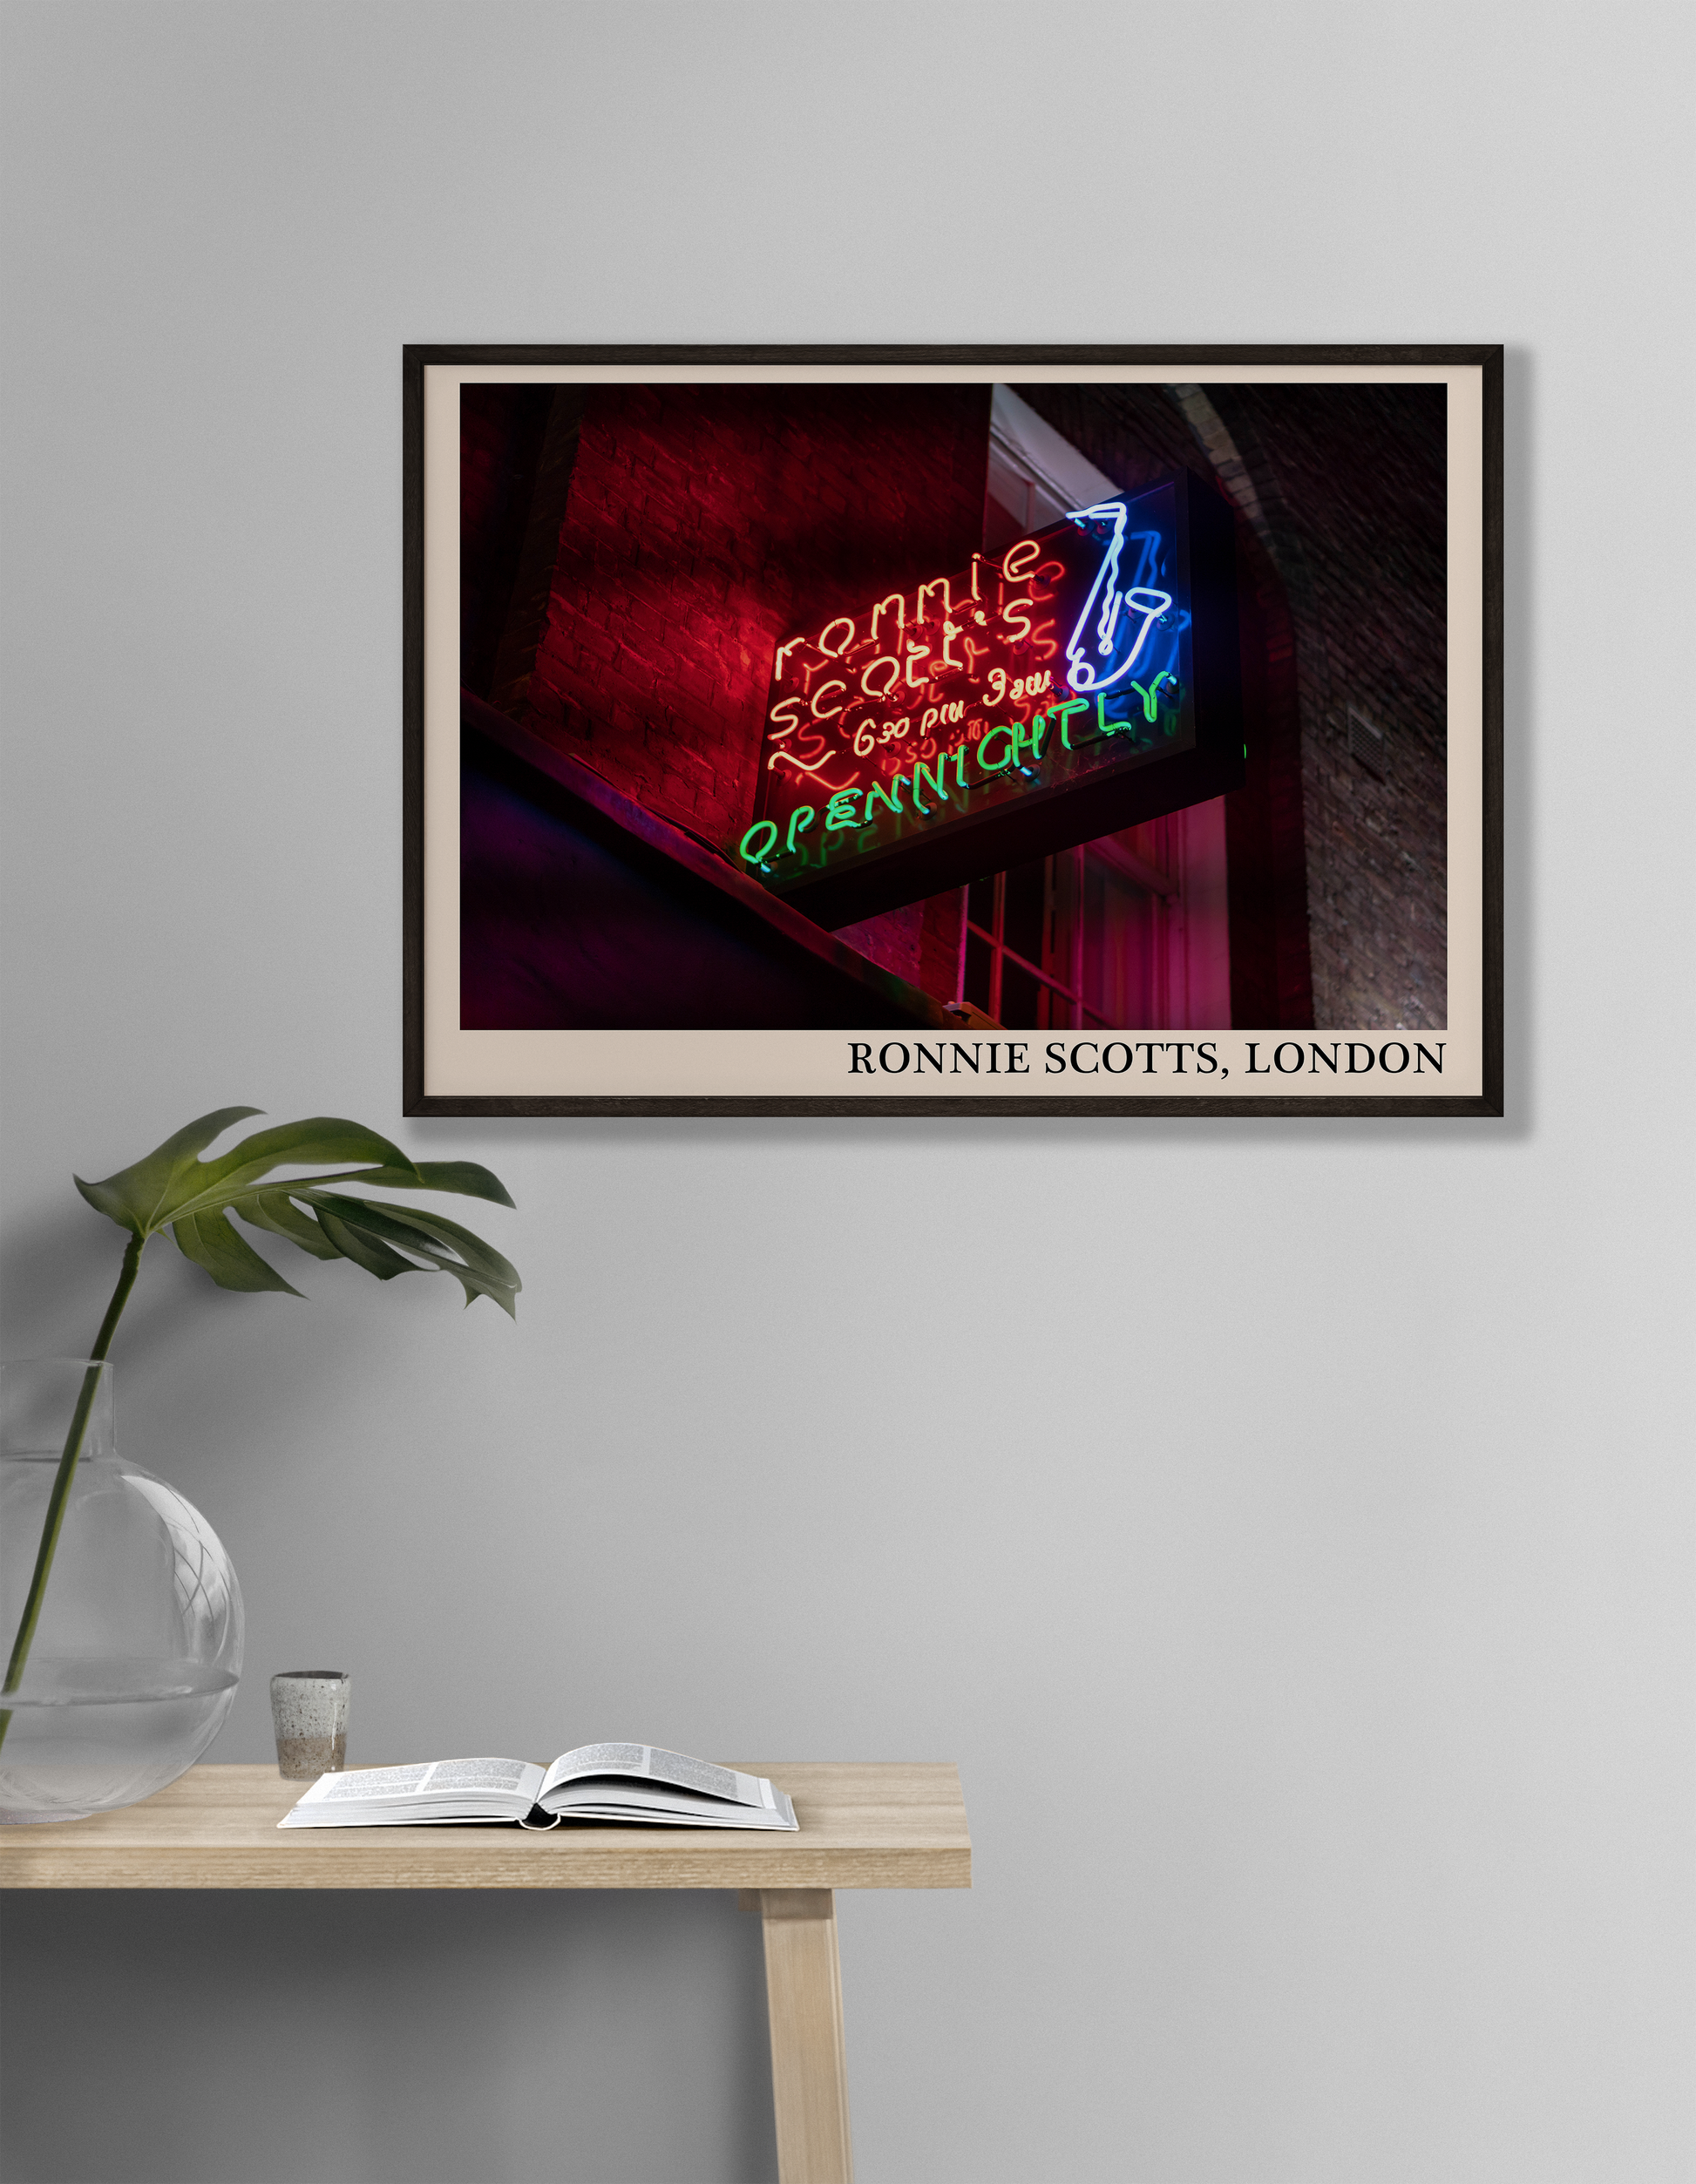 Iconic photo of Ronnie Scotts jazz club in London. Picture crafted into a cool black framed jazz print, with an off-white border. Poster is hanging on a grey living room wall